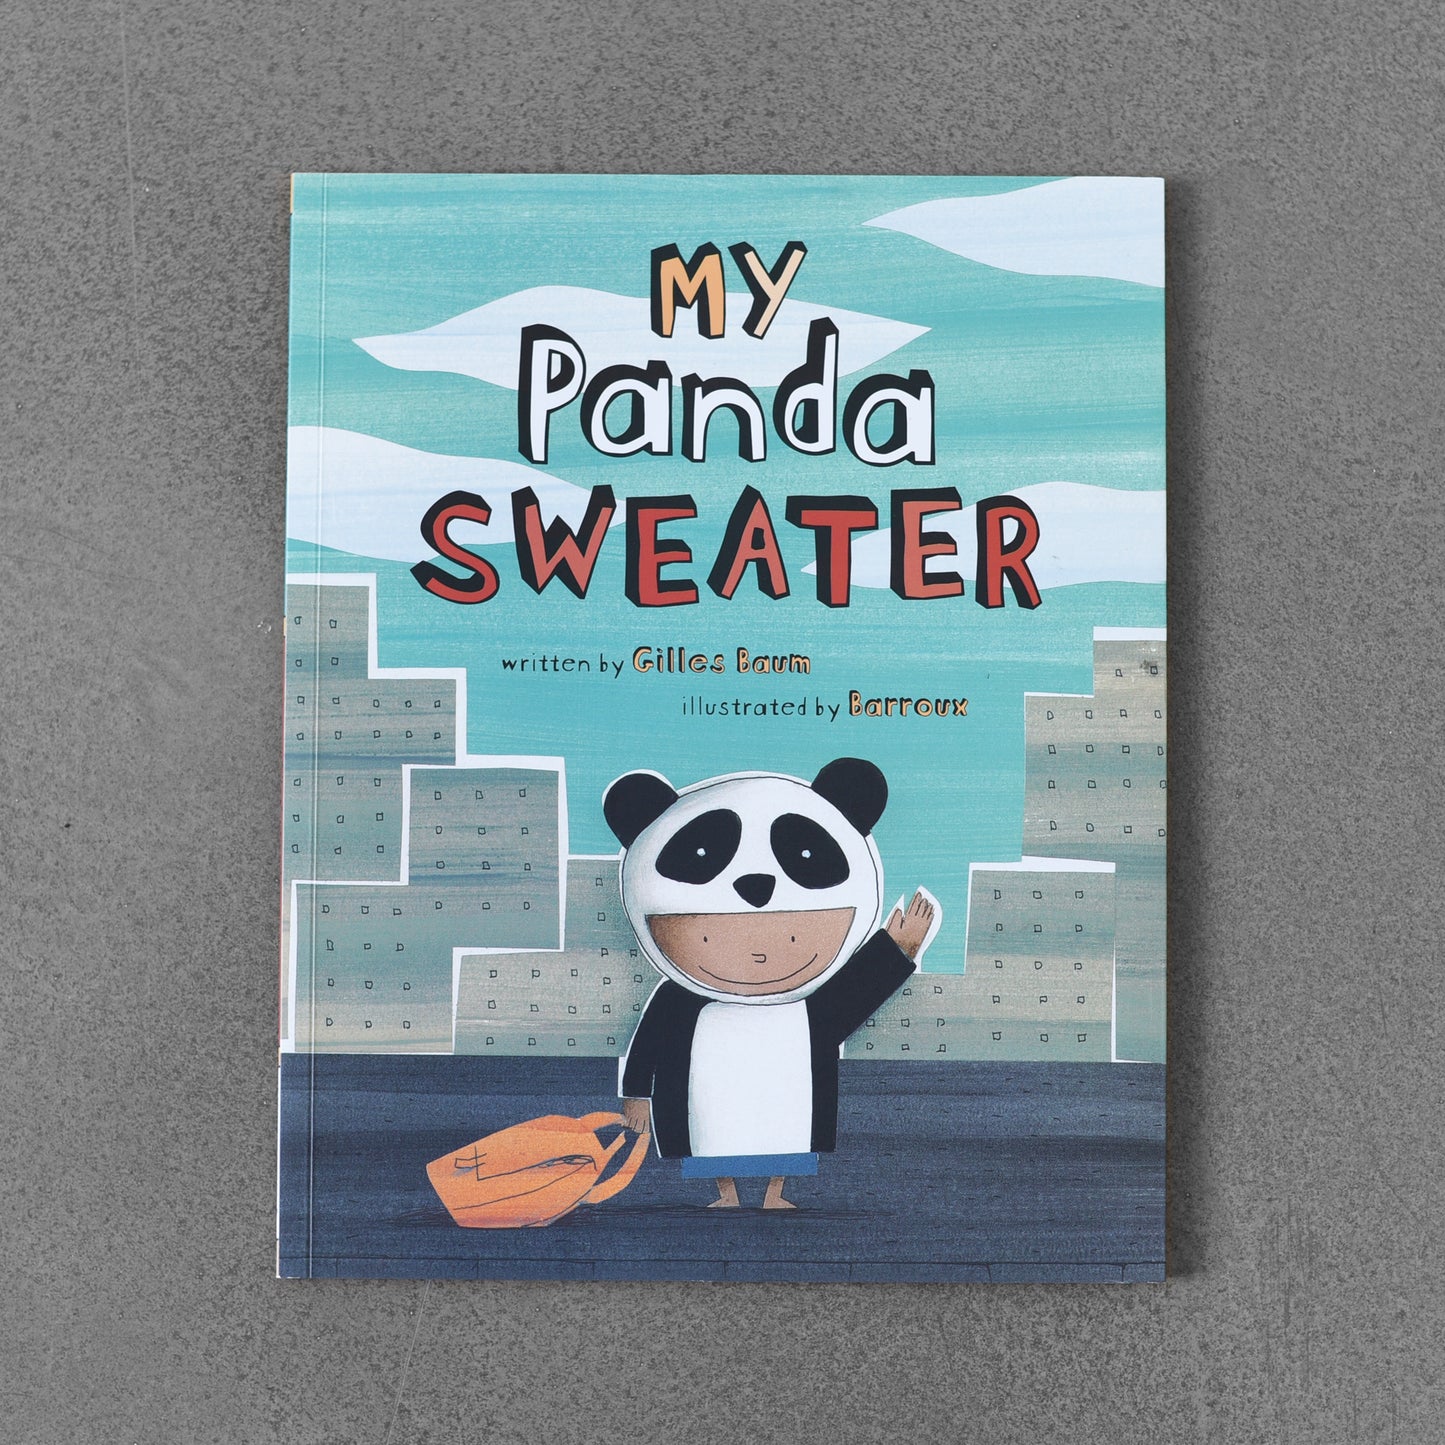 My Panda Sweater - written by Gilles Baum, illustrated by Barroux